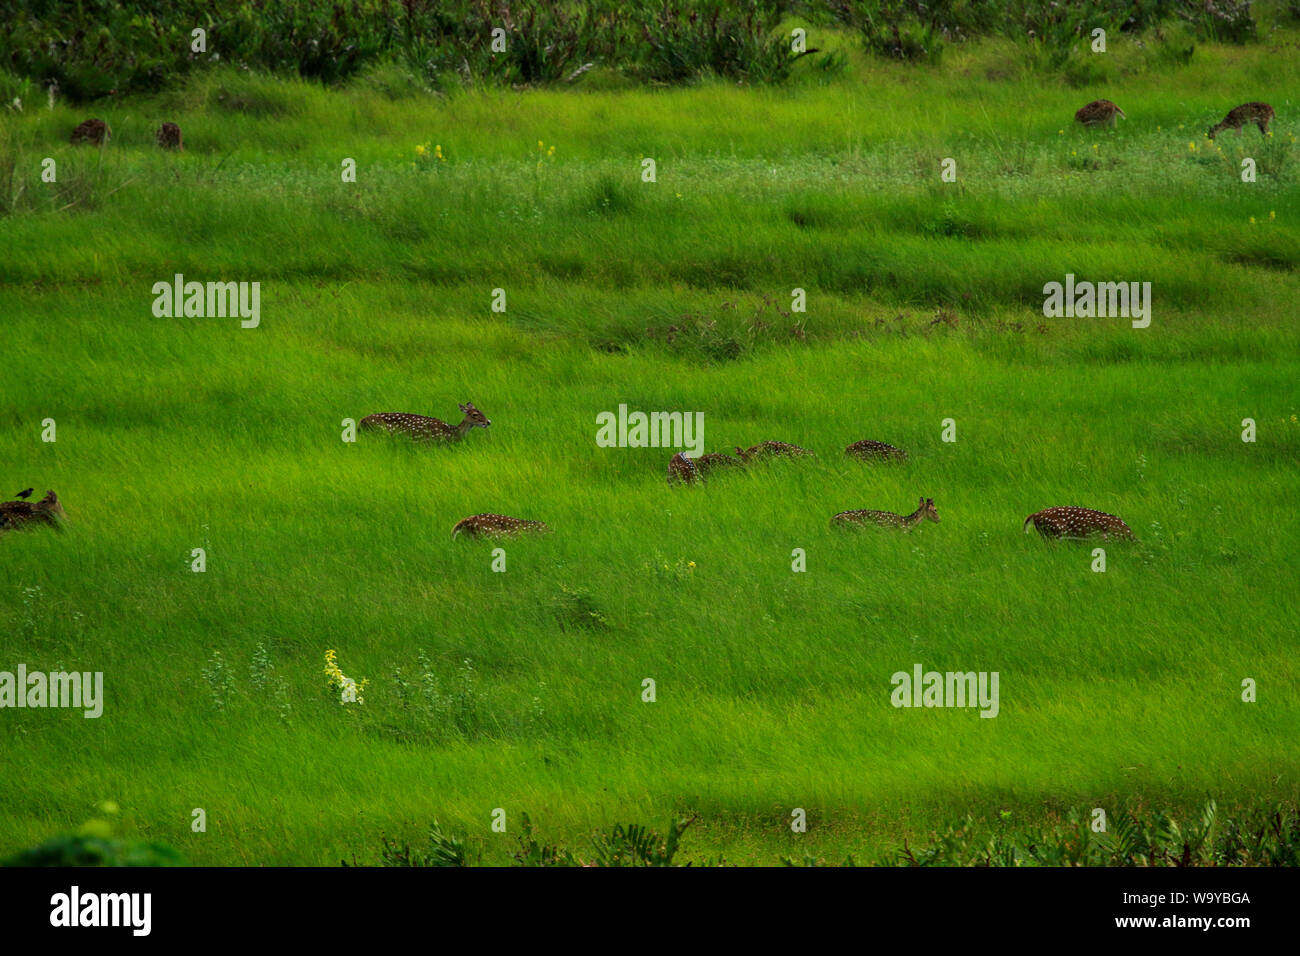 Spotted deer in Sundarbans, the largest mangrove forest in the world. Bangladesh. Stock Photo